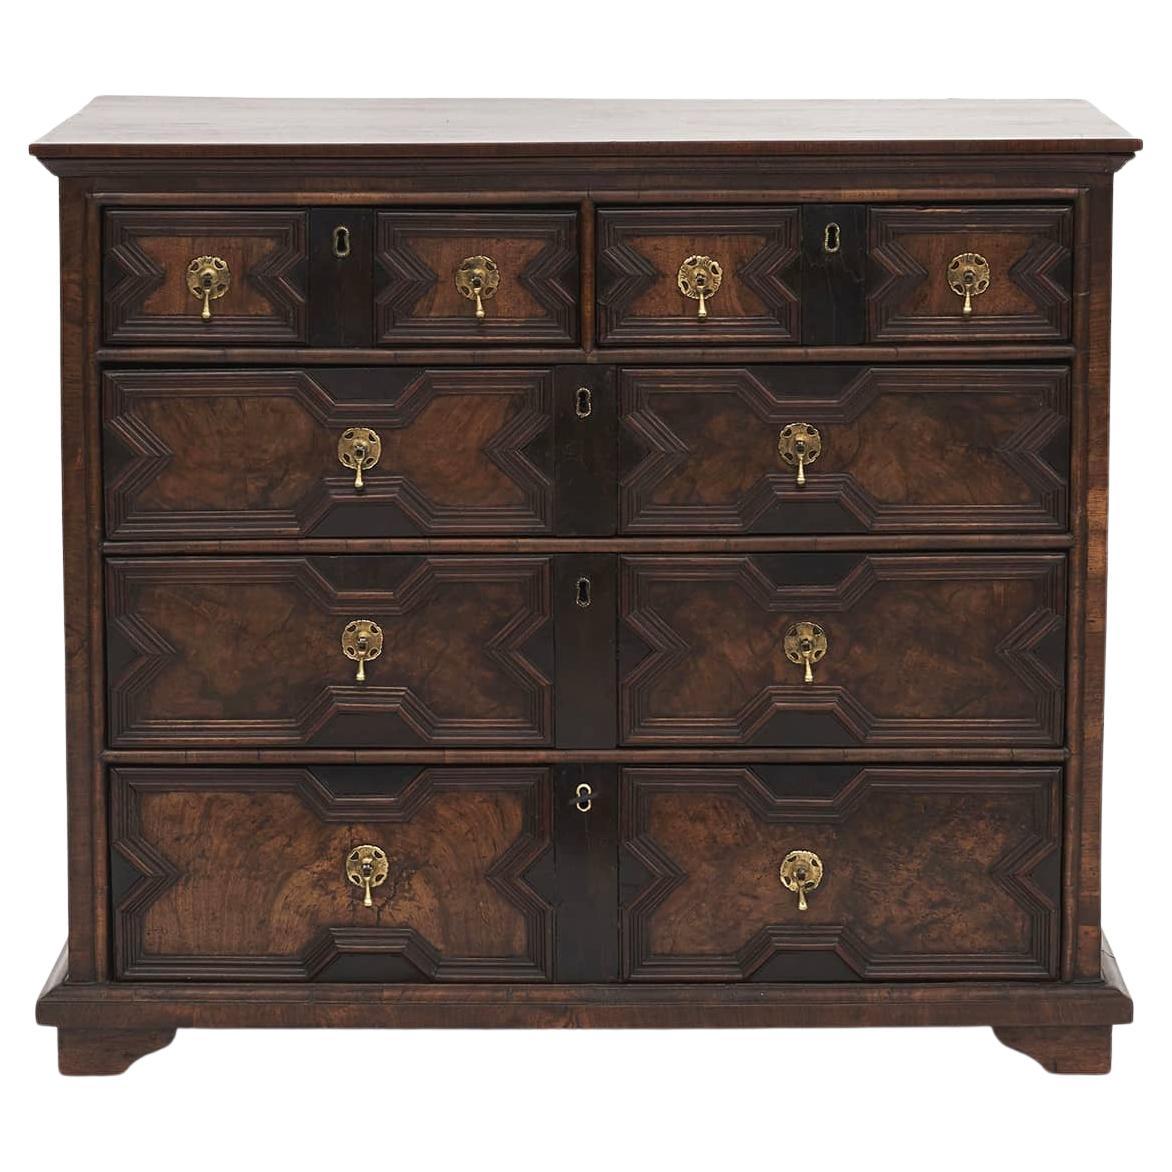 English 18th Century George I Jacobean Chest of Drawers For Sale